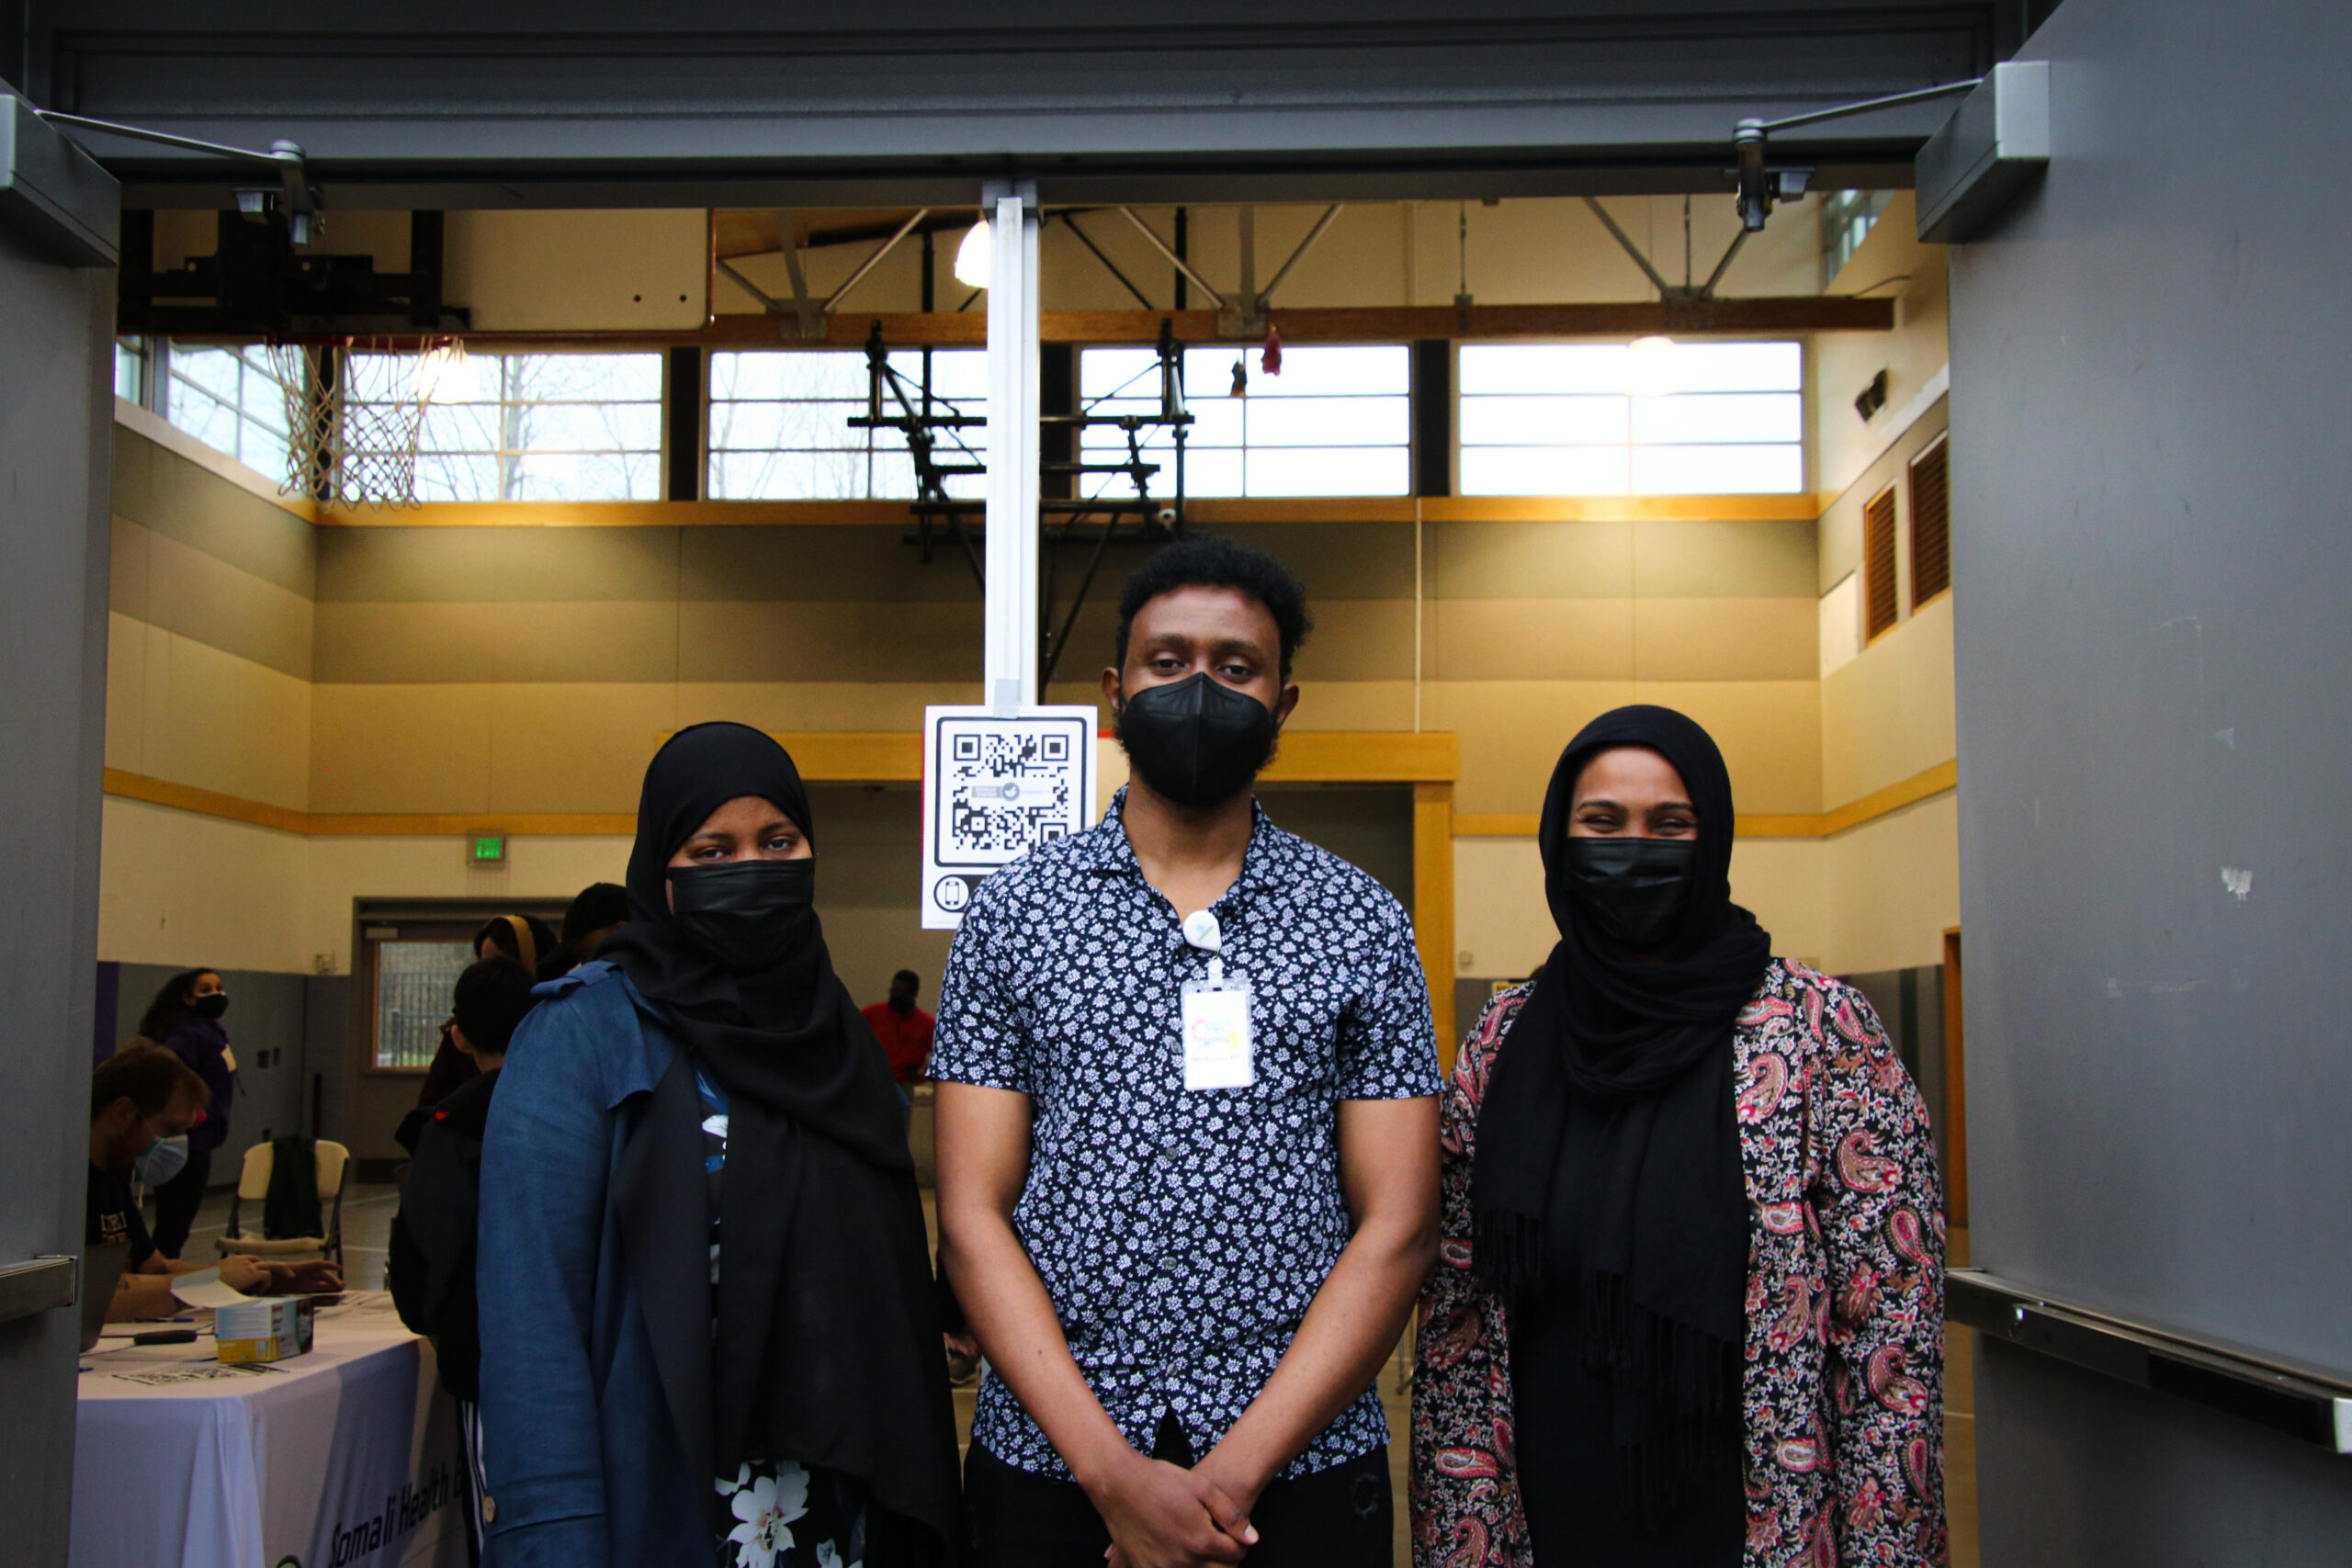 Abdifatah Ali Dahiye, in a patterned short sleeve button-up and a mask, stands in between two colleagues who are wearing masks and head scarves. They are at a public event for COVID-19 testing.